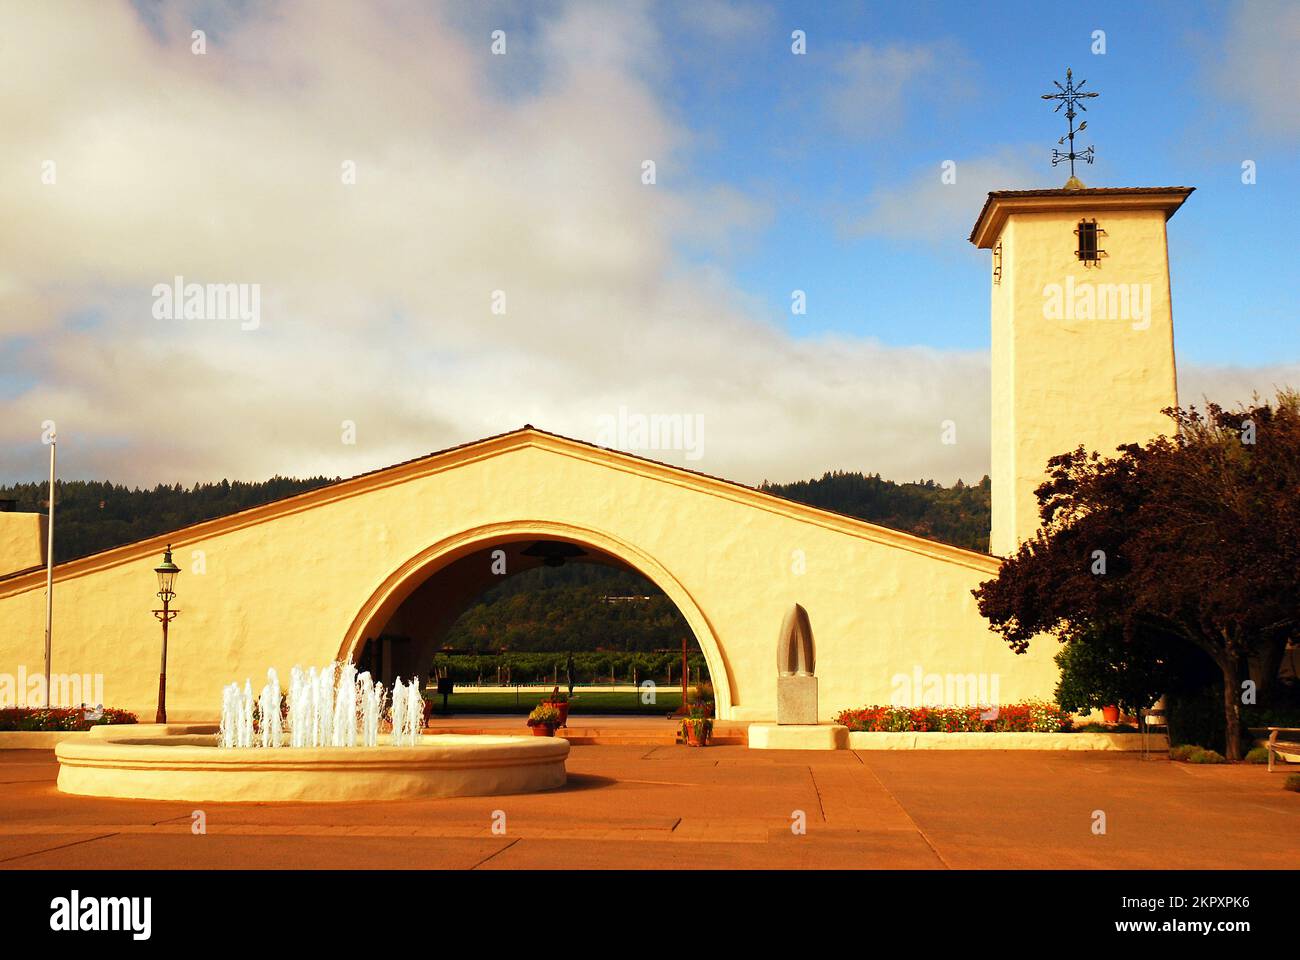 The Robert Mondavi winery is a popular vineyard in the Napa Valley in California Stock Photo